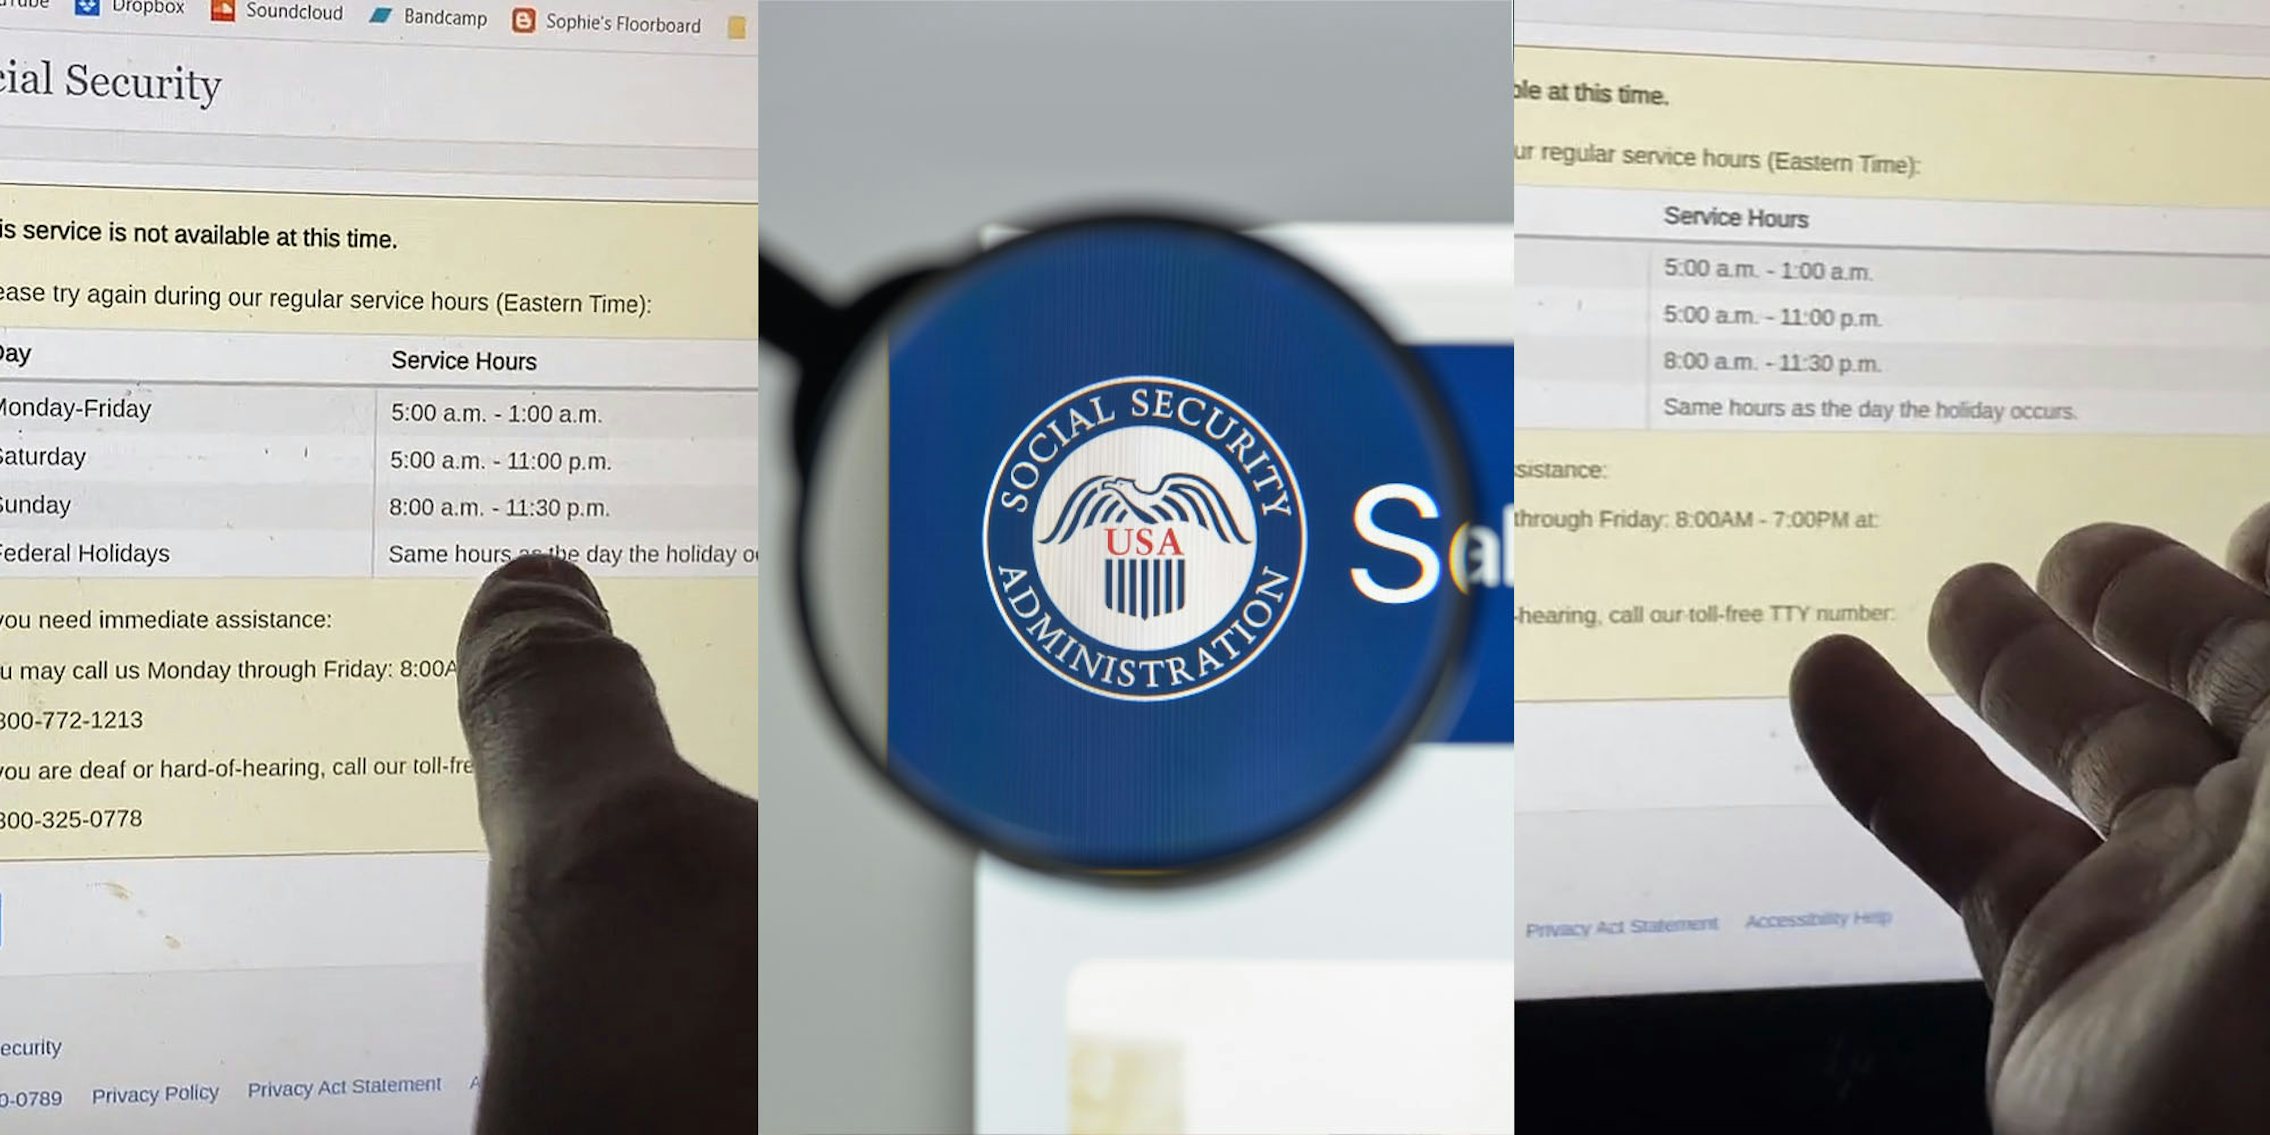 man pointing to computer screen at Social Security website displaying 'Service Hours' (l) Social Security Administration logo in magnifying glass lens (c) man hand out towards computer screen displaying 'Service Hours' (r)